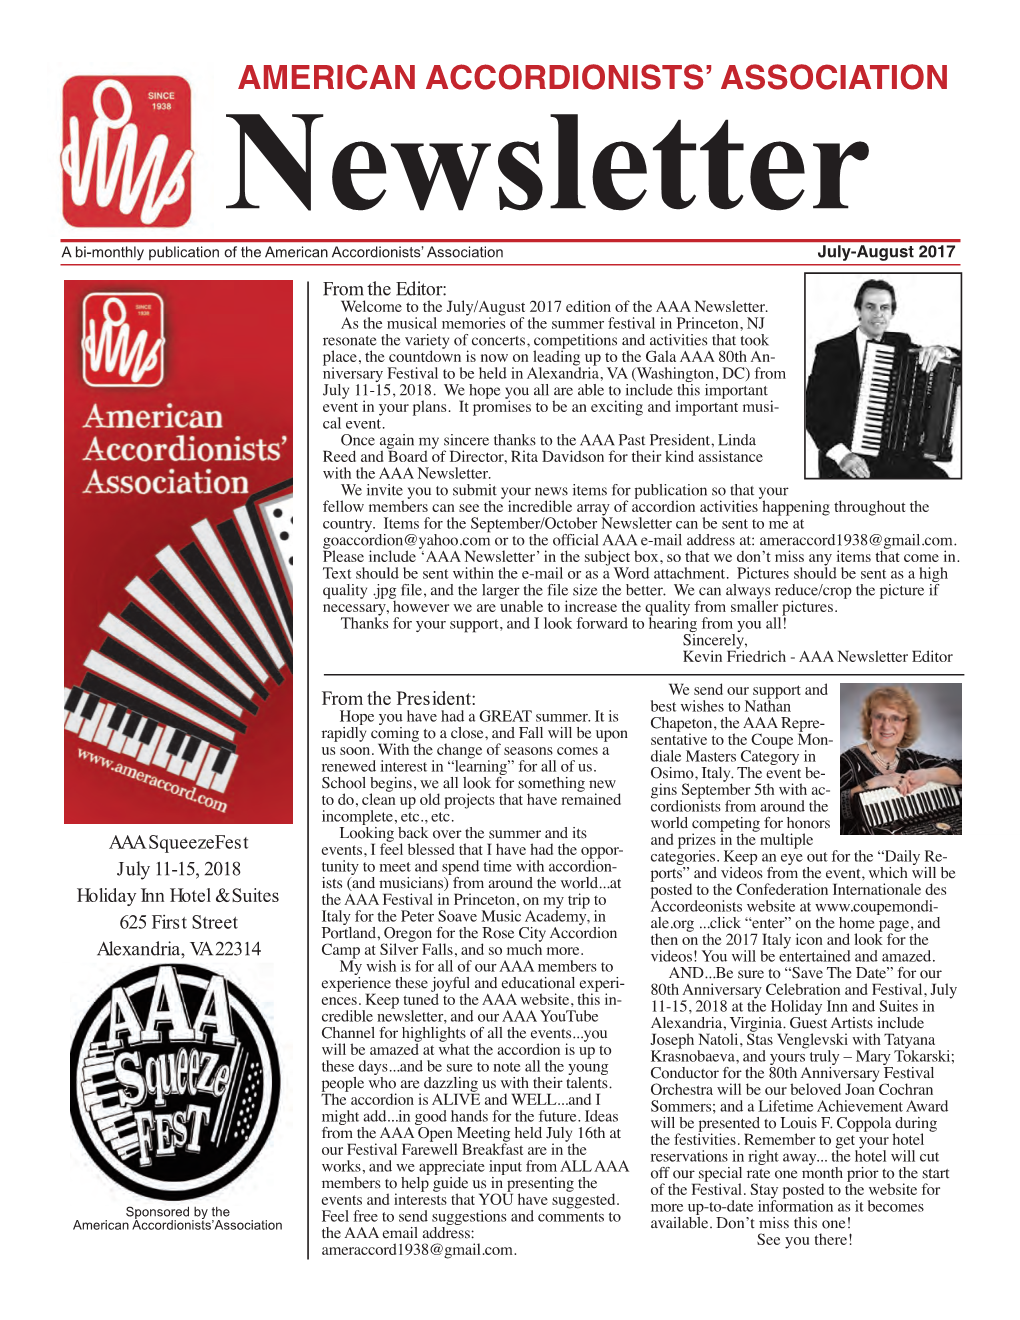 July-August 2017 from the Editor: Welcome to the July/August 2017 Edition of the AAA Newsletter